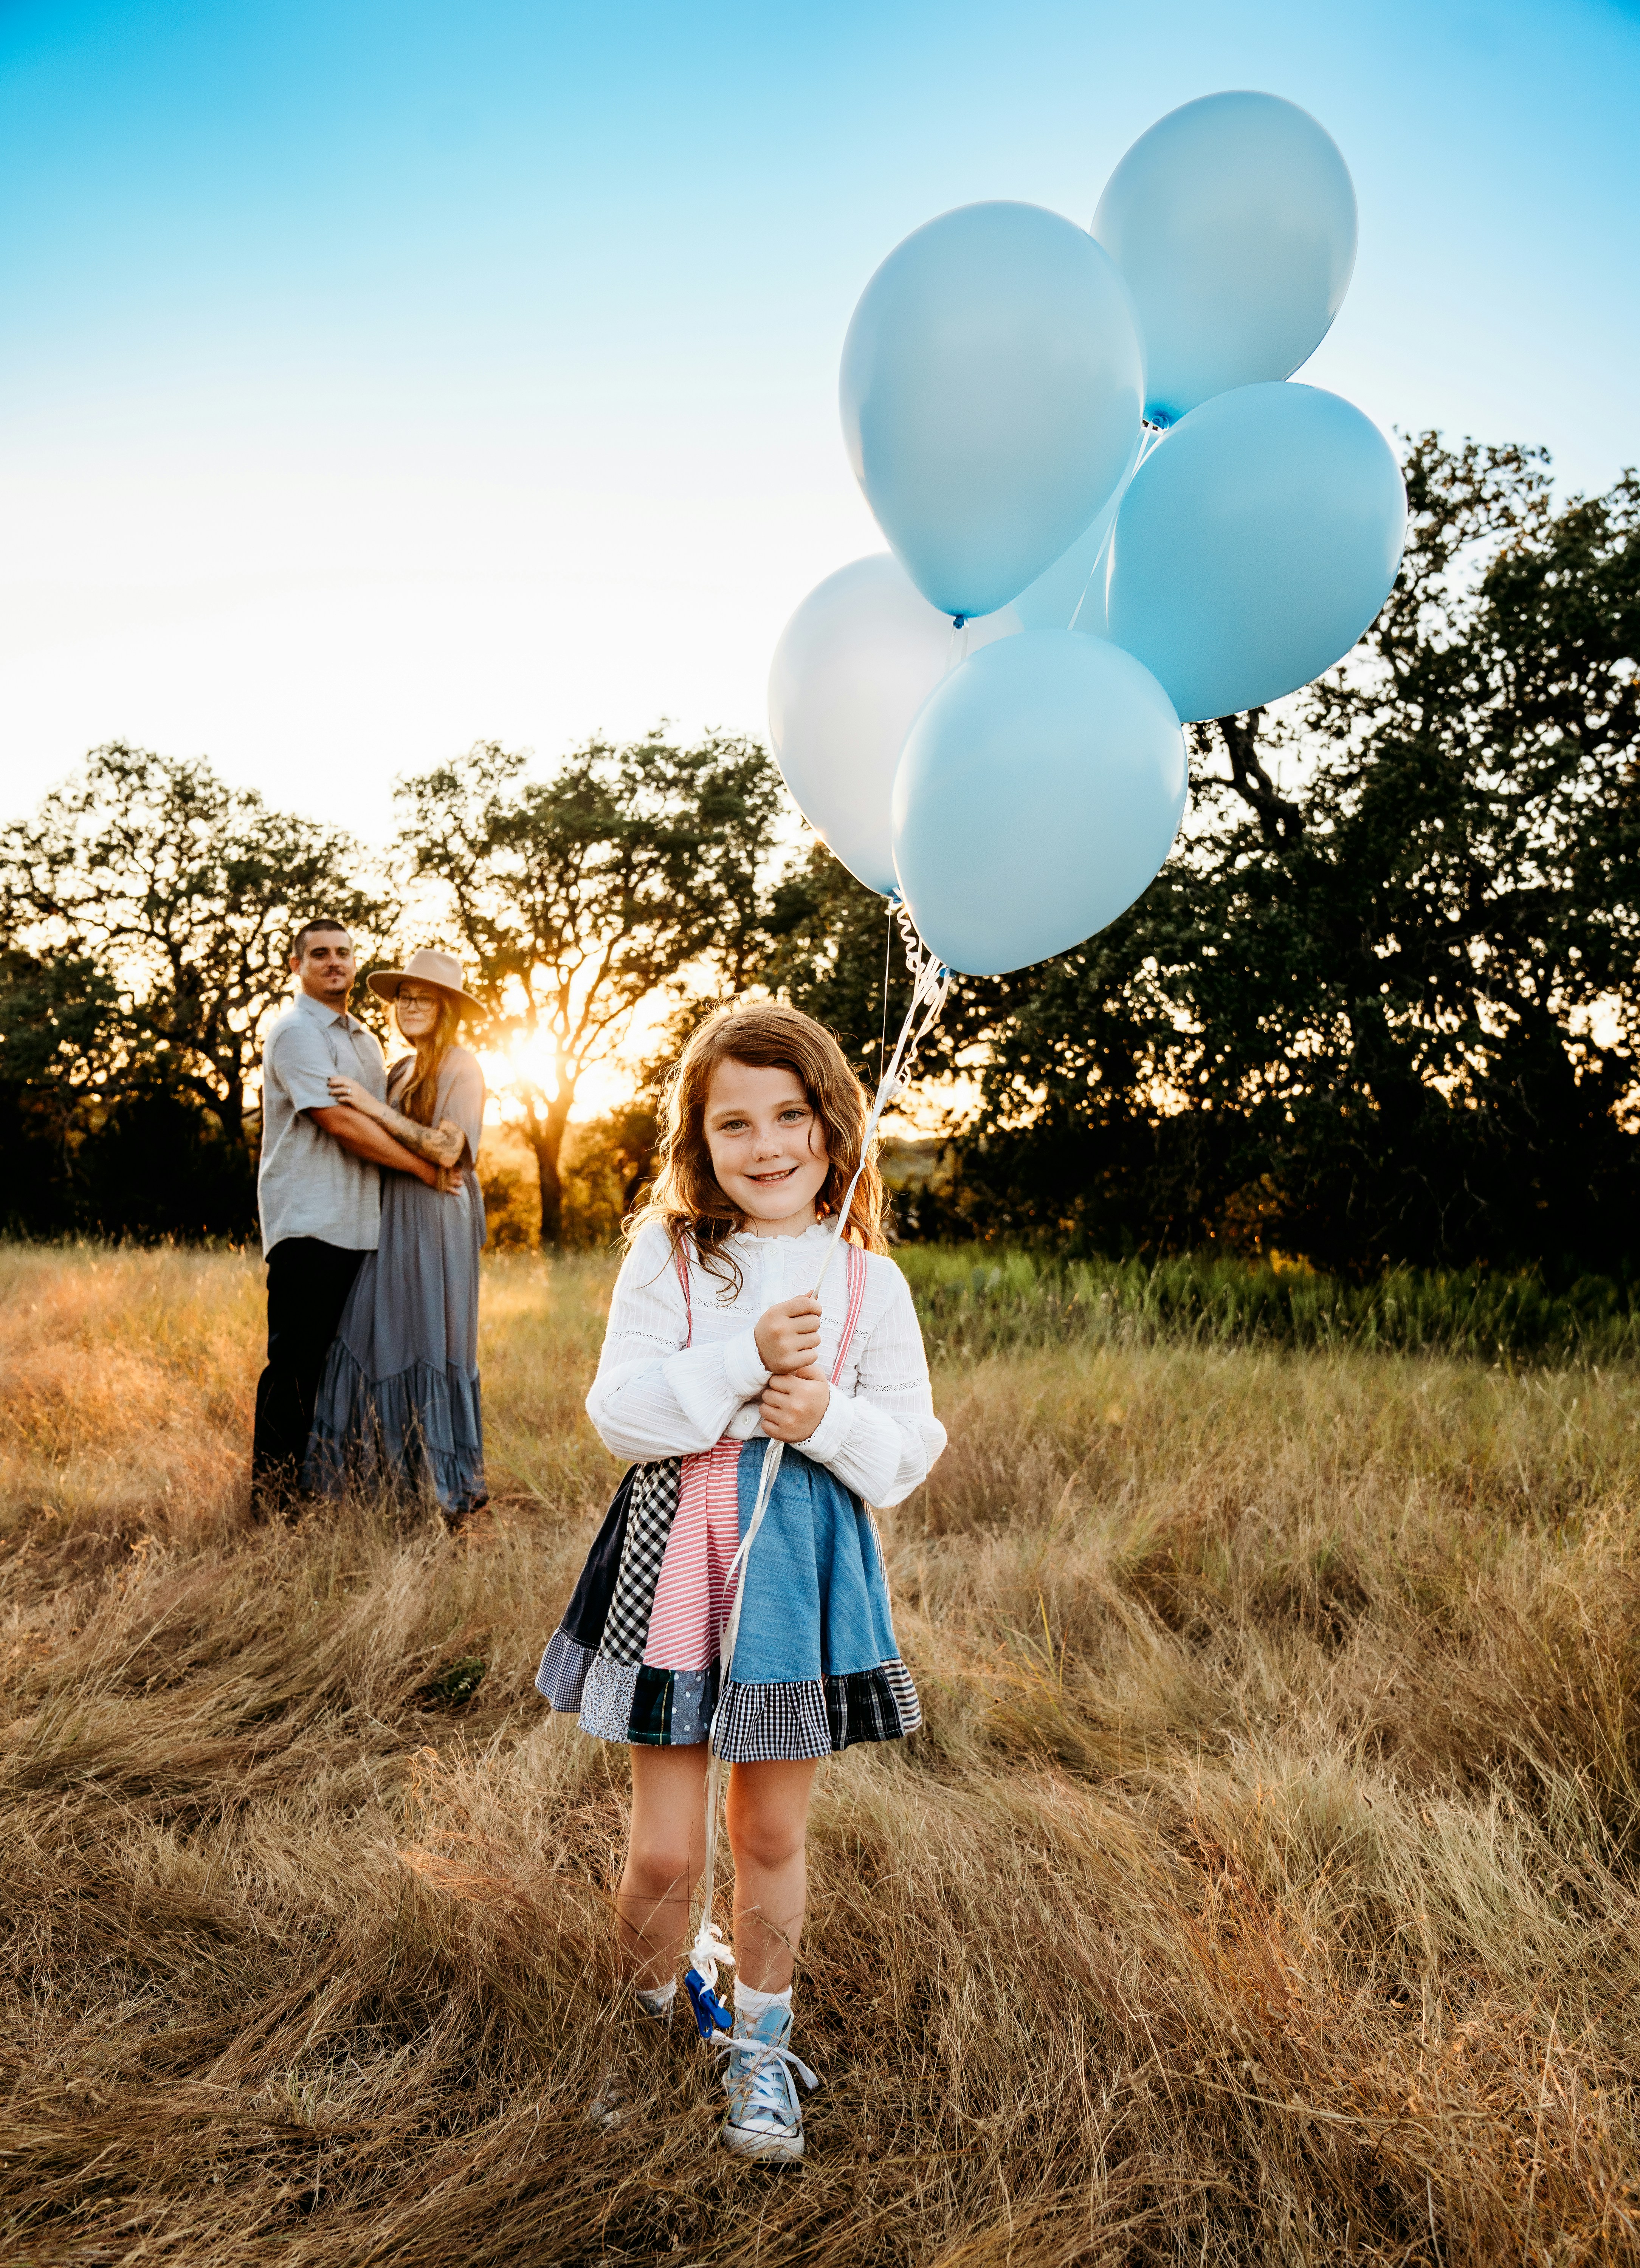 great photo recipe,how to photograph a little girl holding a bunch of white balloons